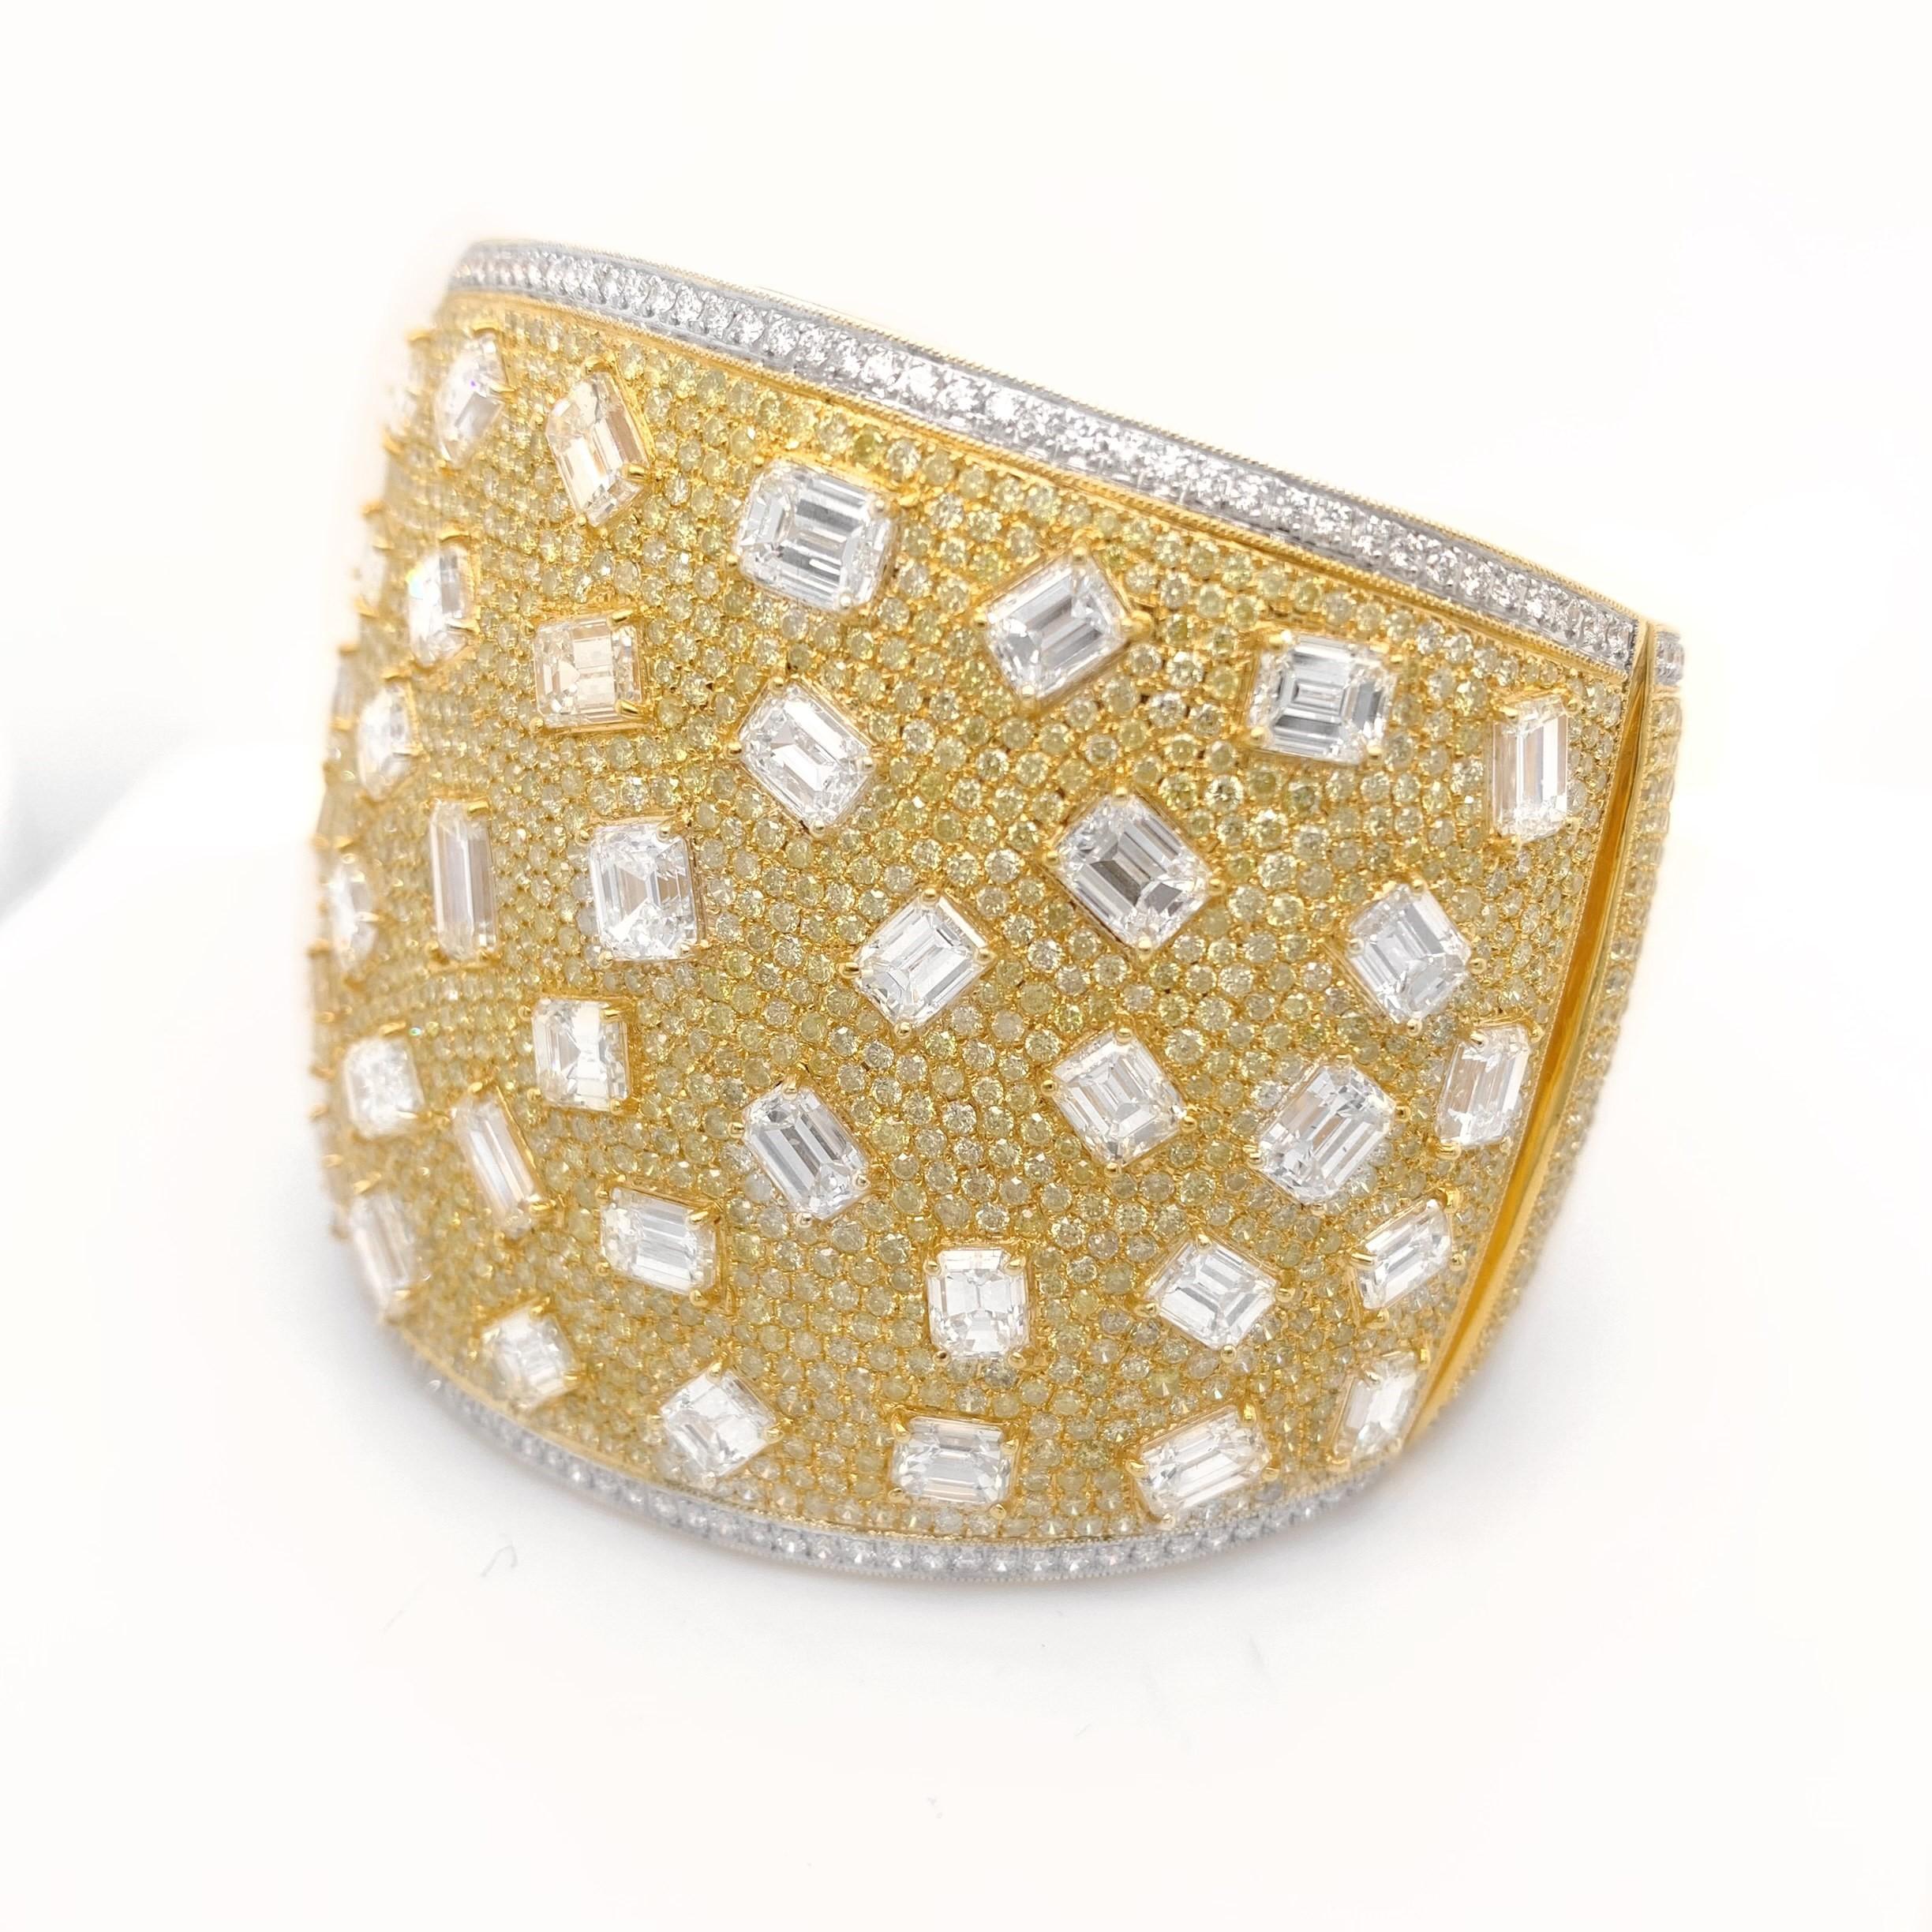 18K Yellow Gold Cuff with 25.74ct Rectangular Cut Diamonds,Surrounded by total weight of 2.51ct Round Diamonds and 34.65ct Yellow Diamonds.

Sophia D by Joseph Dardashti LTD has been known worldwide for 35 years and are inspired by classic Art Deco